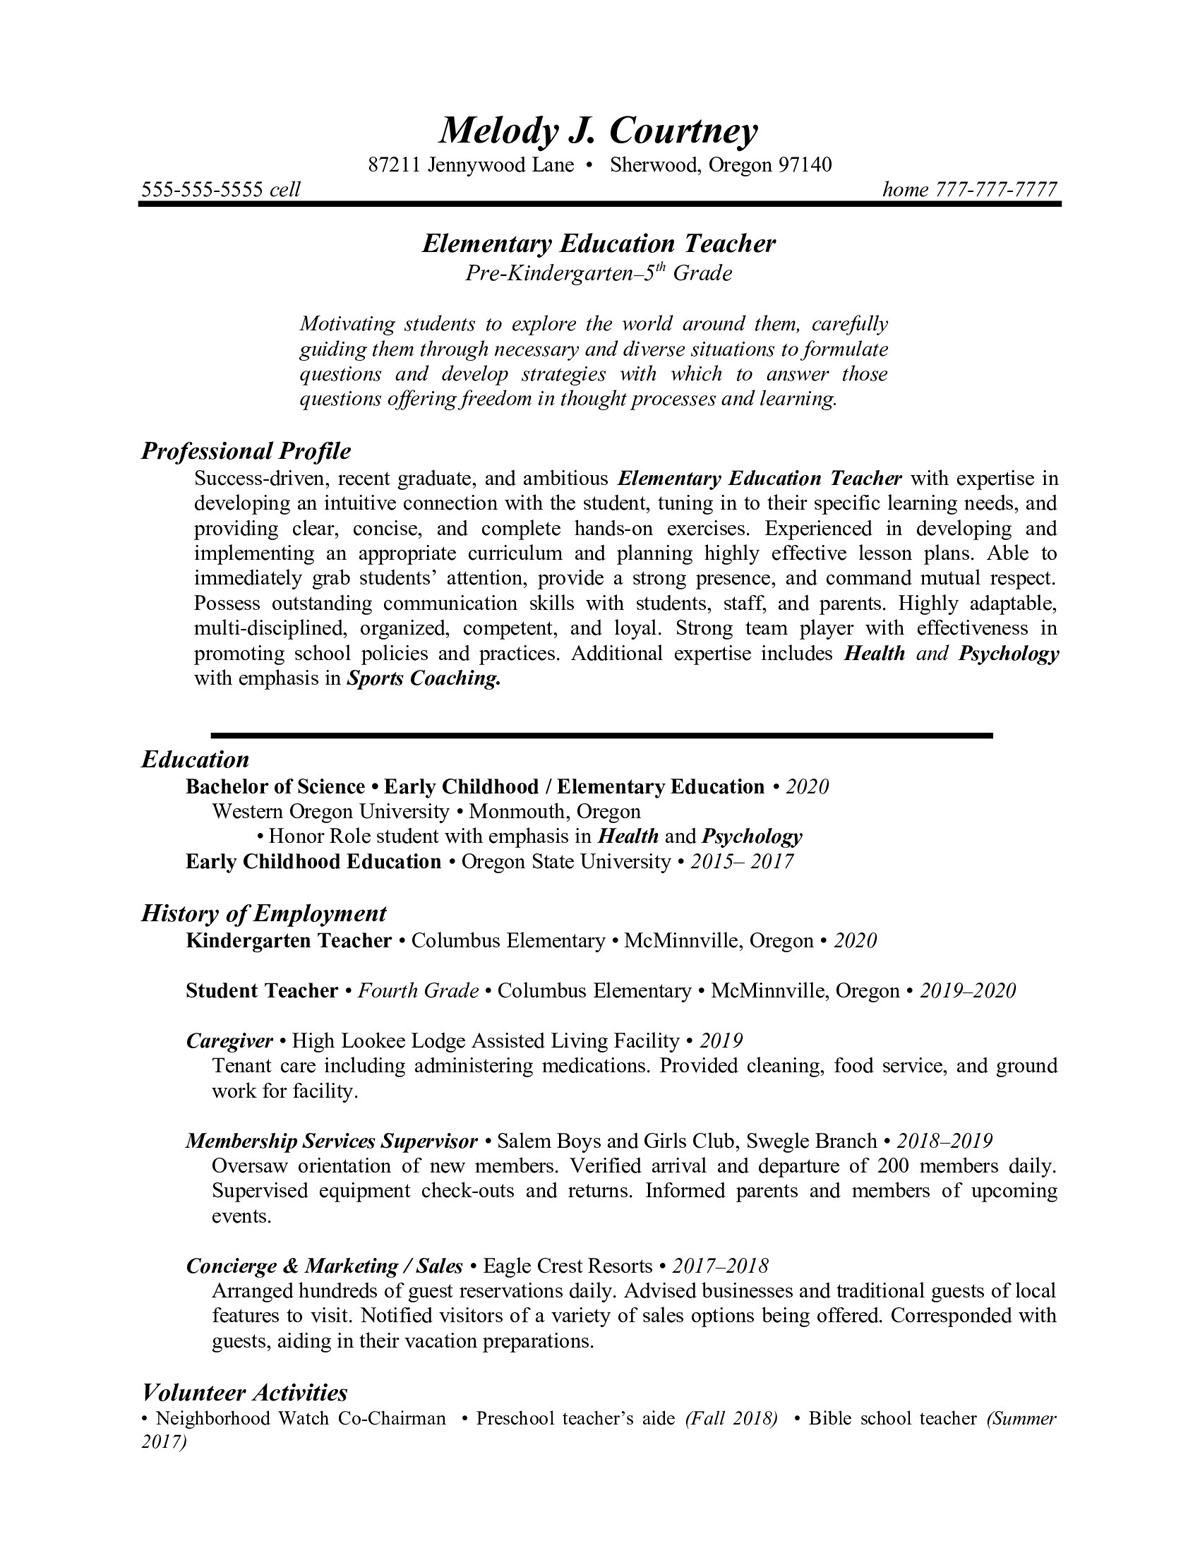 Sample resume: Elementary Education, Low Experience, Chronological